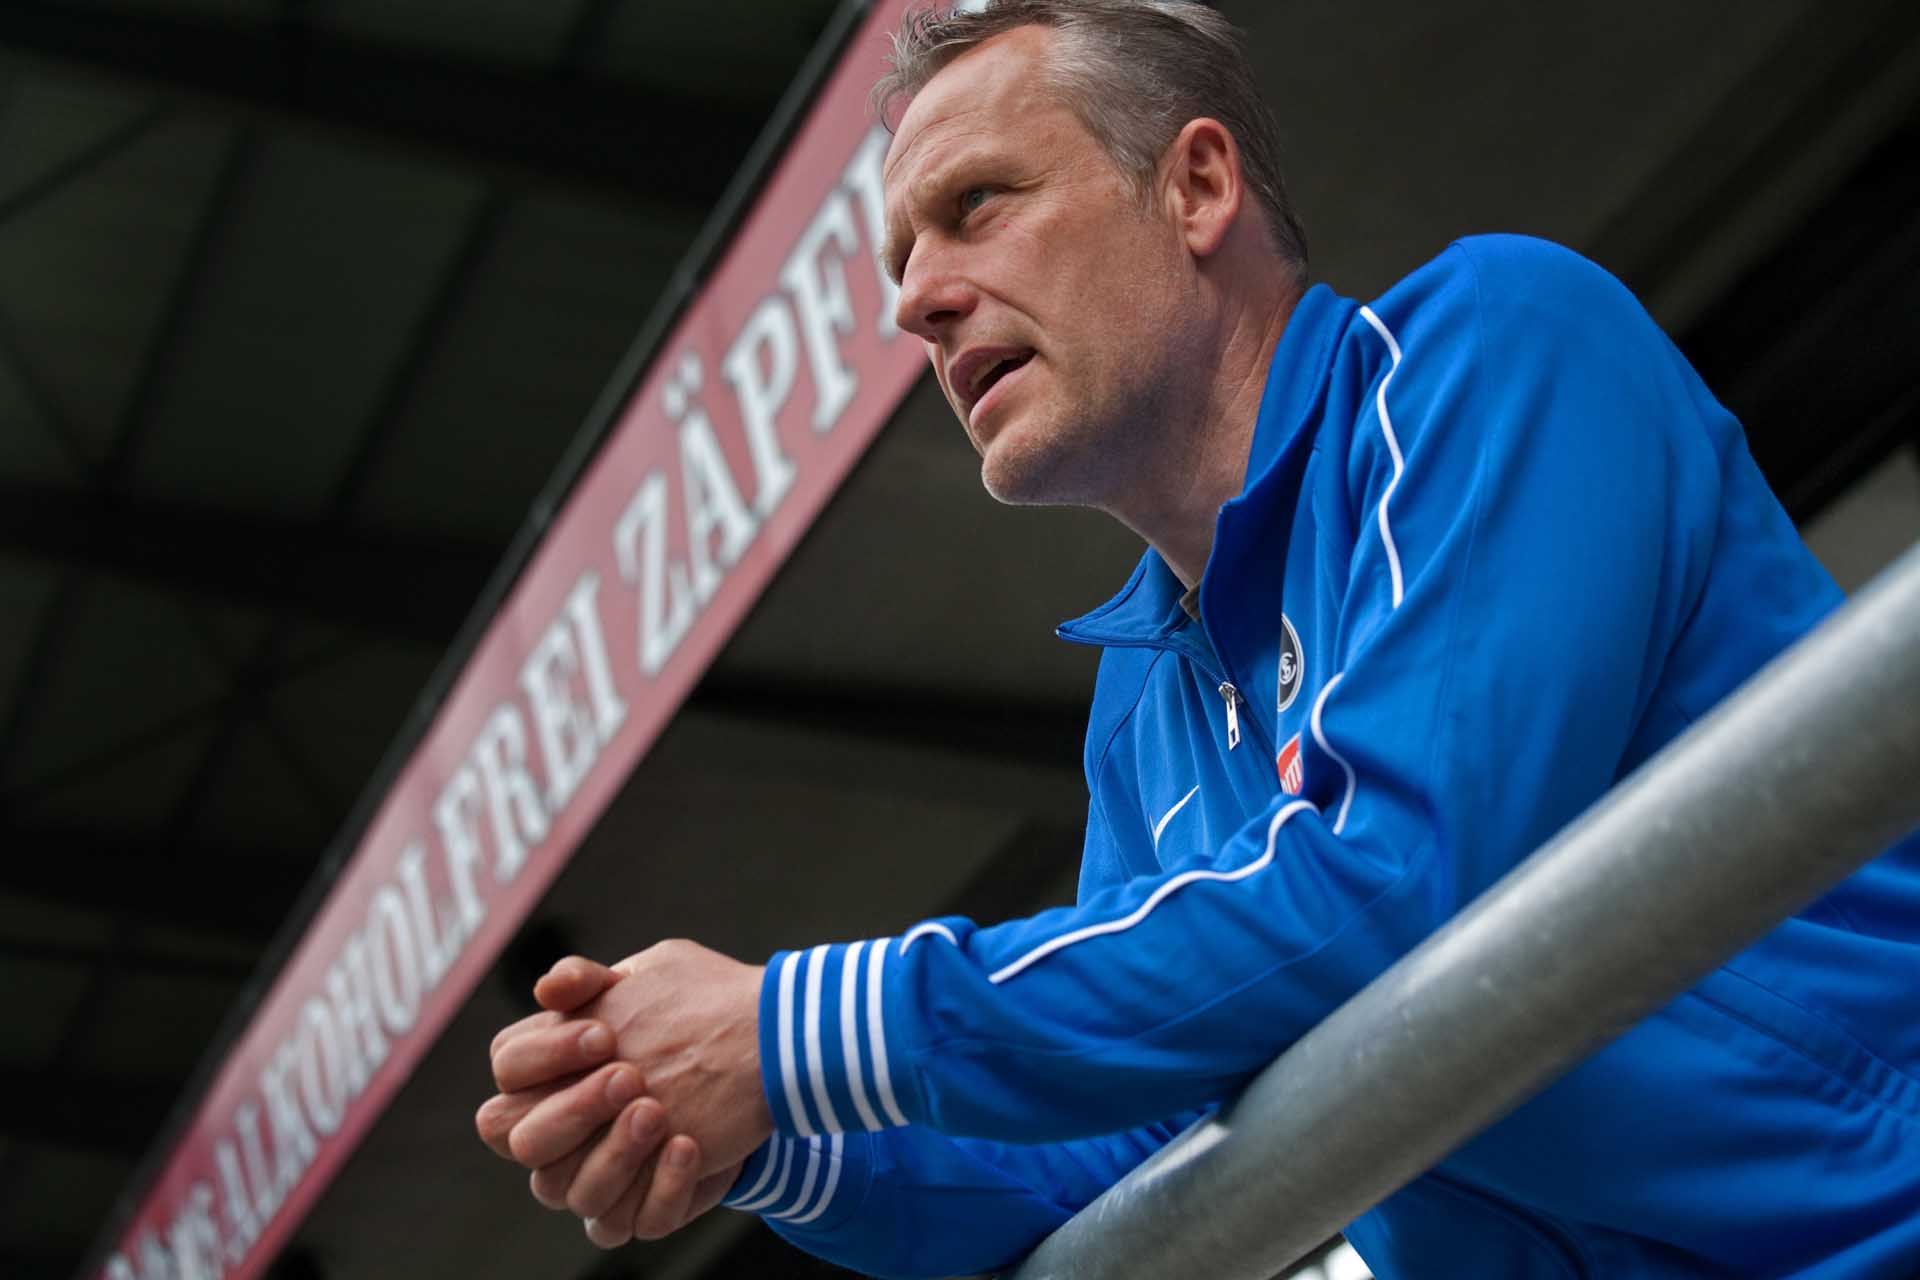 Freiburg's coach Christian Streich is looking to the future with great confidence and hope